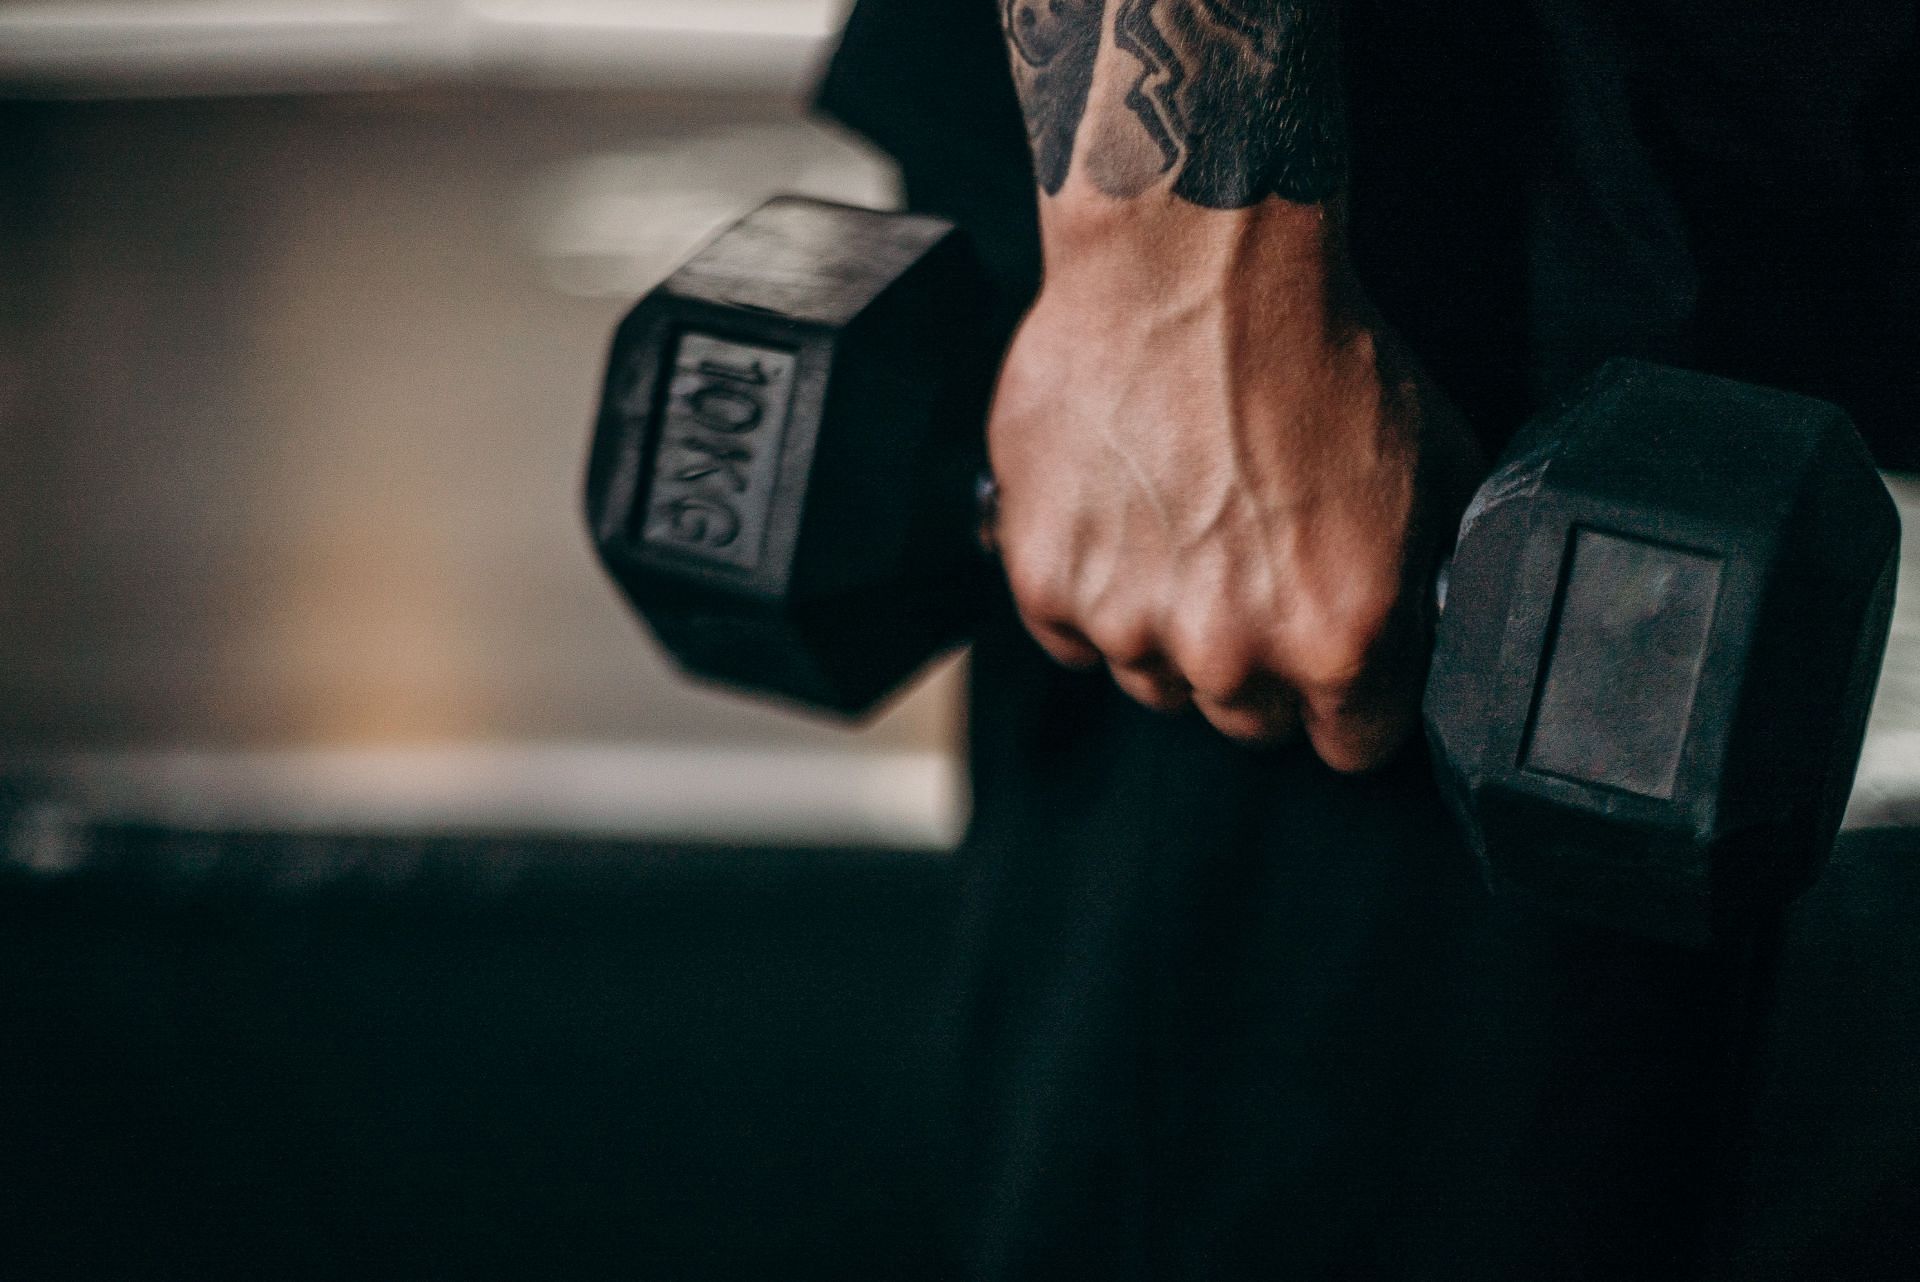 Single arm hammer curl can isolate the muscles better (Image via Pexels/Cottonbro Studio)